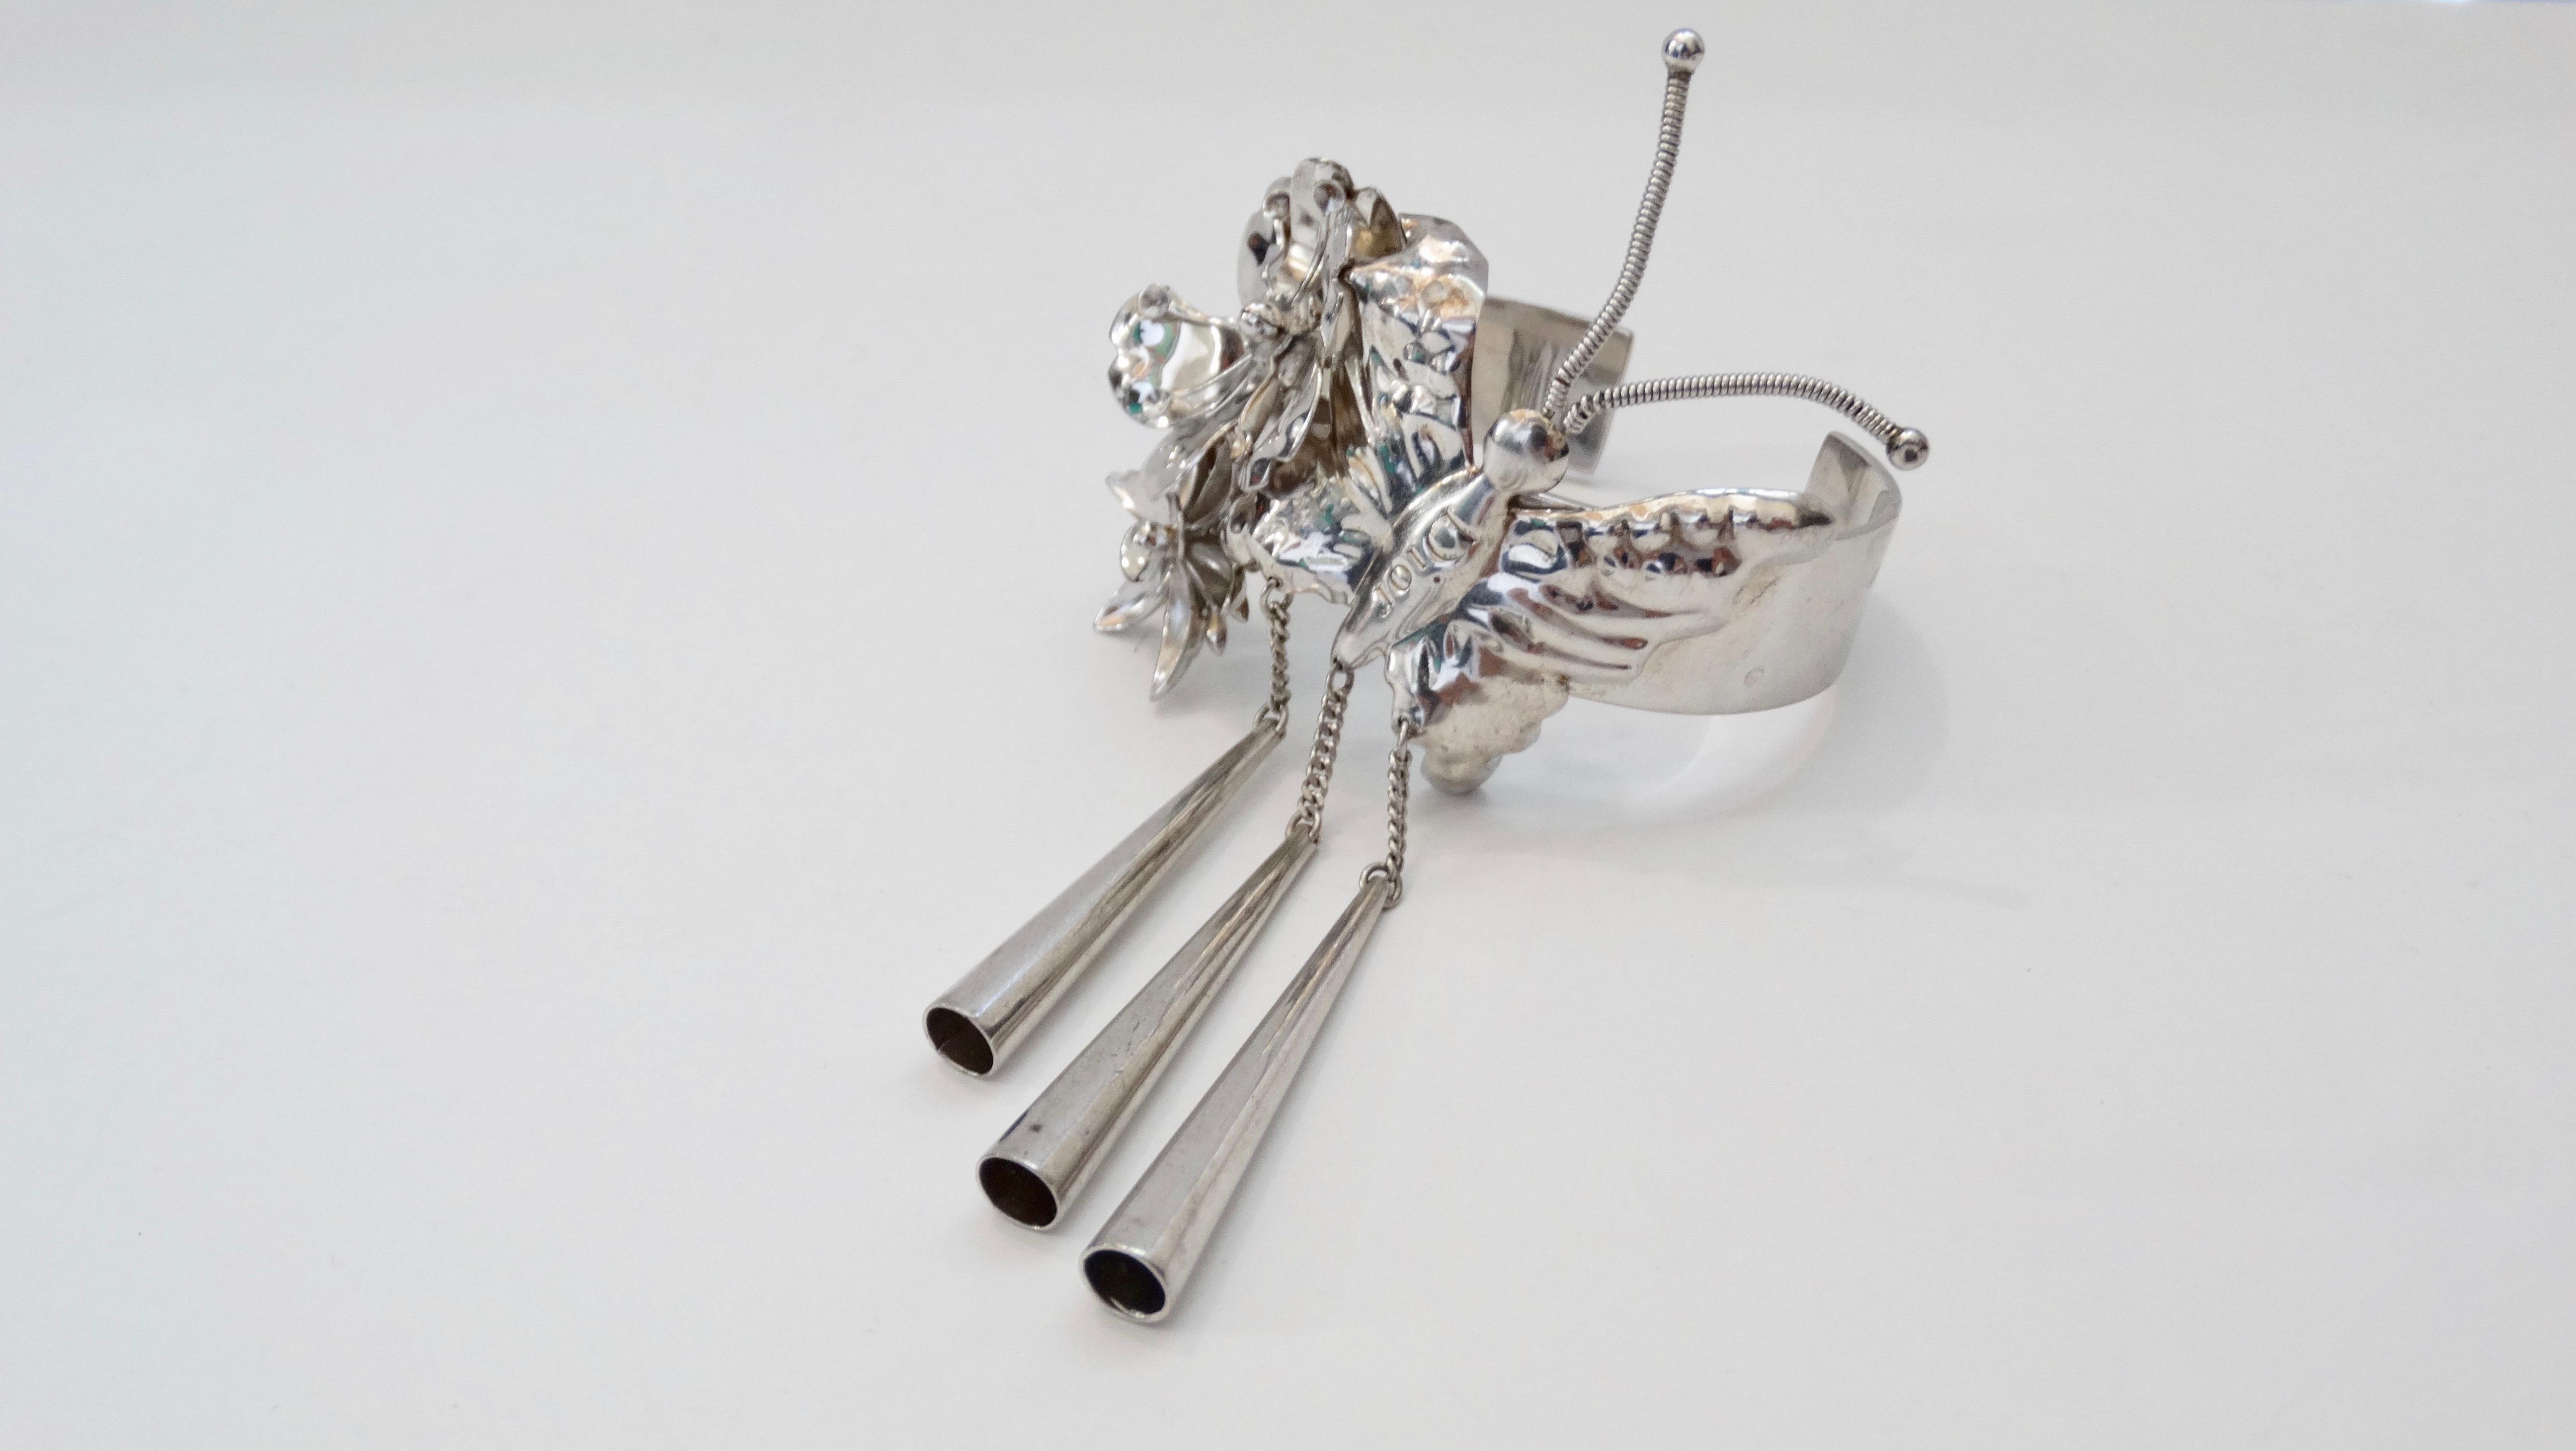 Show off some eye candy with this true work of art by John Galliano for Dior! Circa 2003/2004 from their Fall/Winter collection, this cuff highlights influences from the Chinese and Japanese culture. Crafted from Silver and adorned with a gorgeous